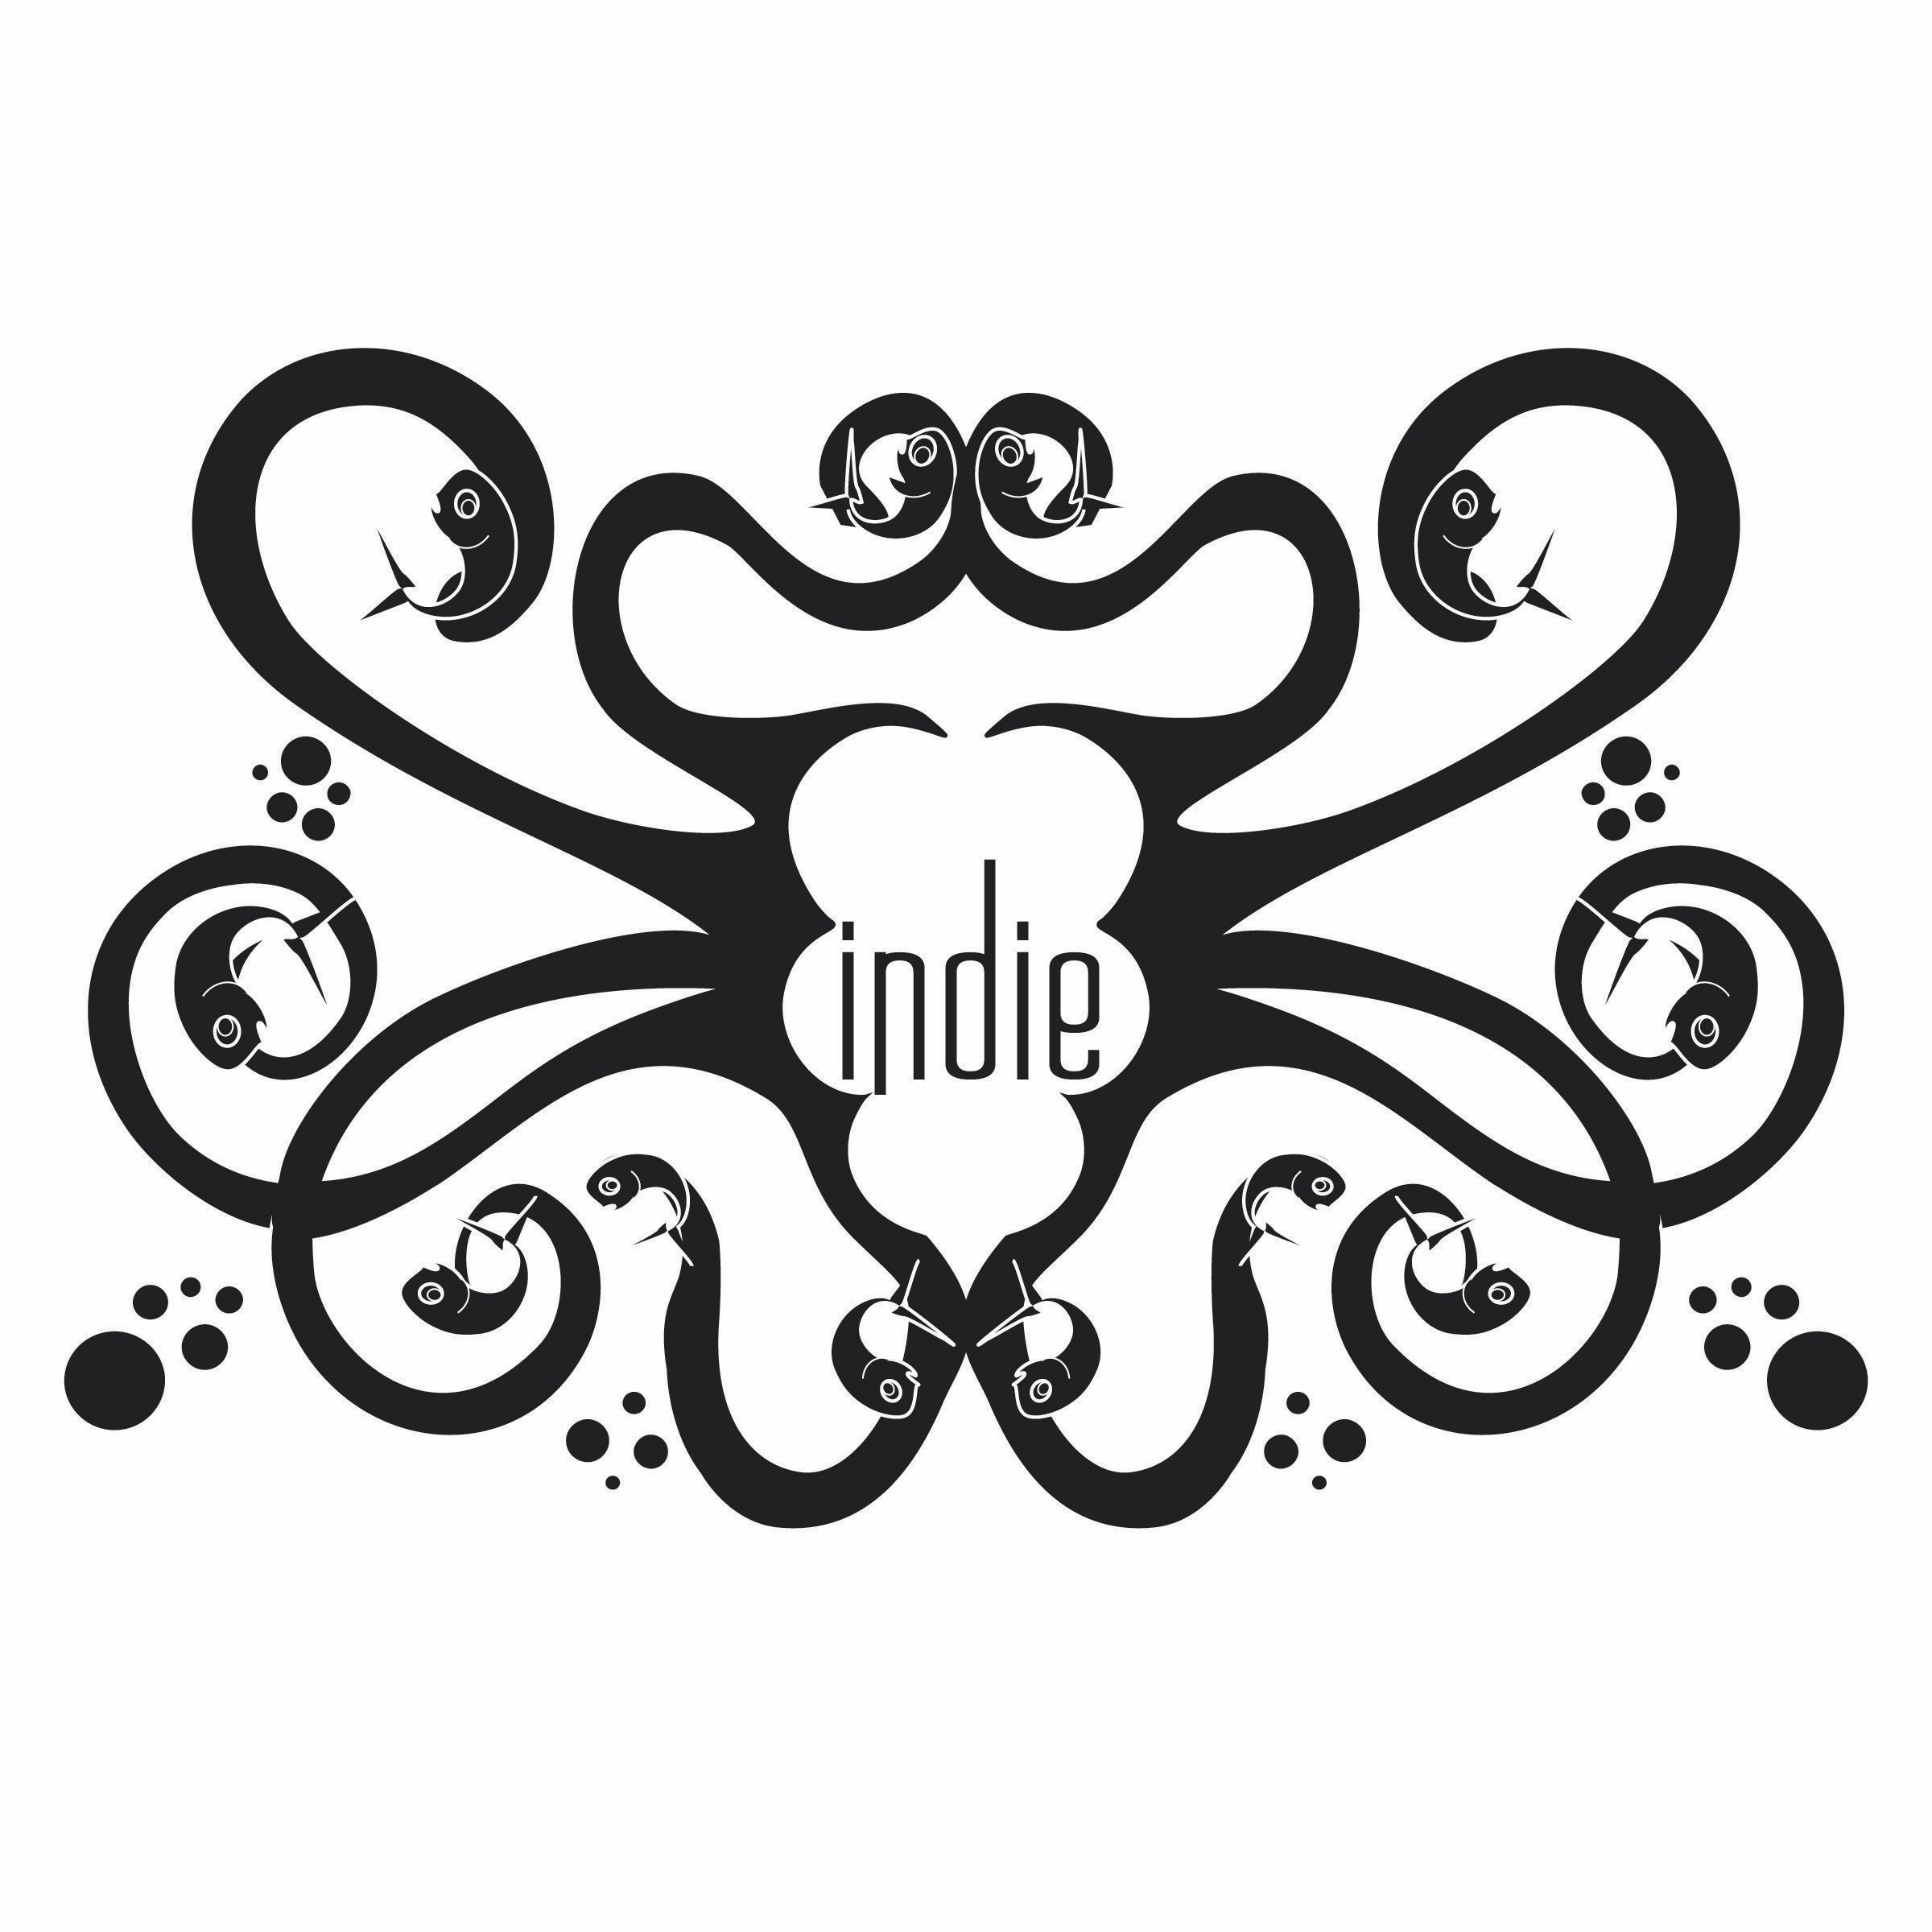 www.indiecafe.us